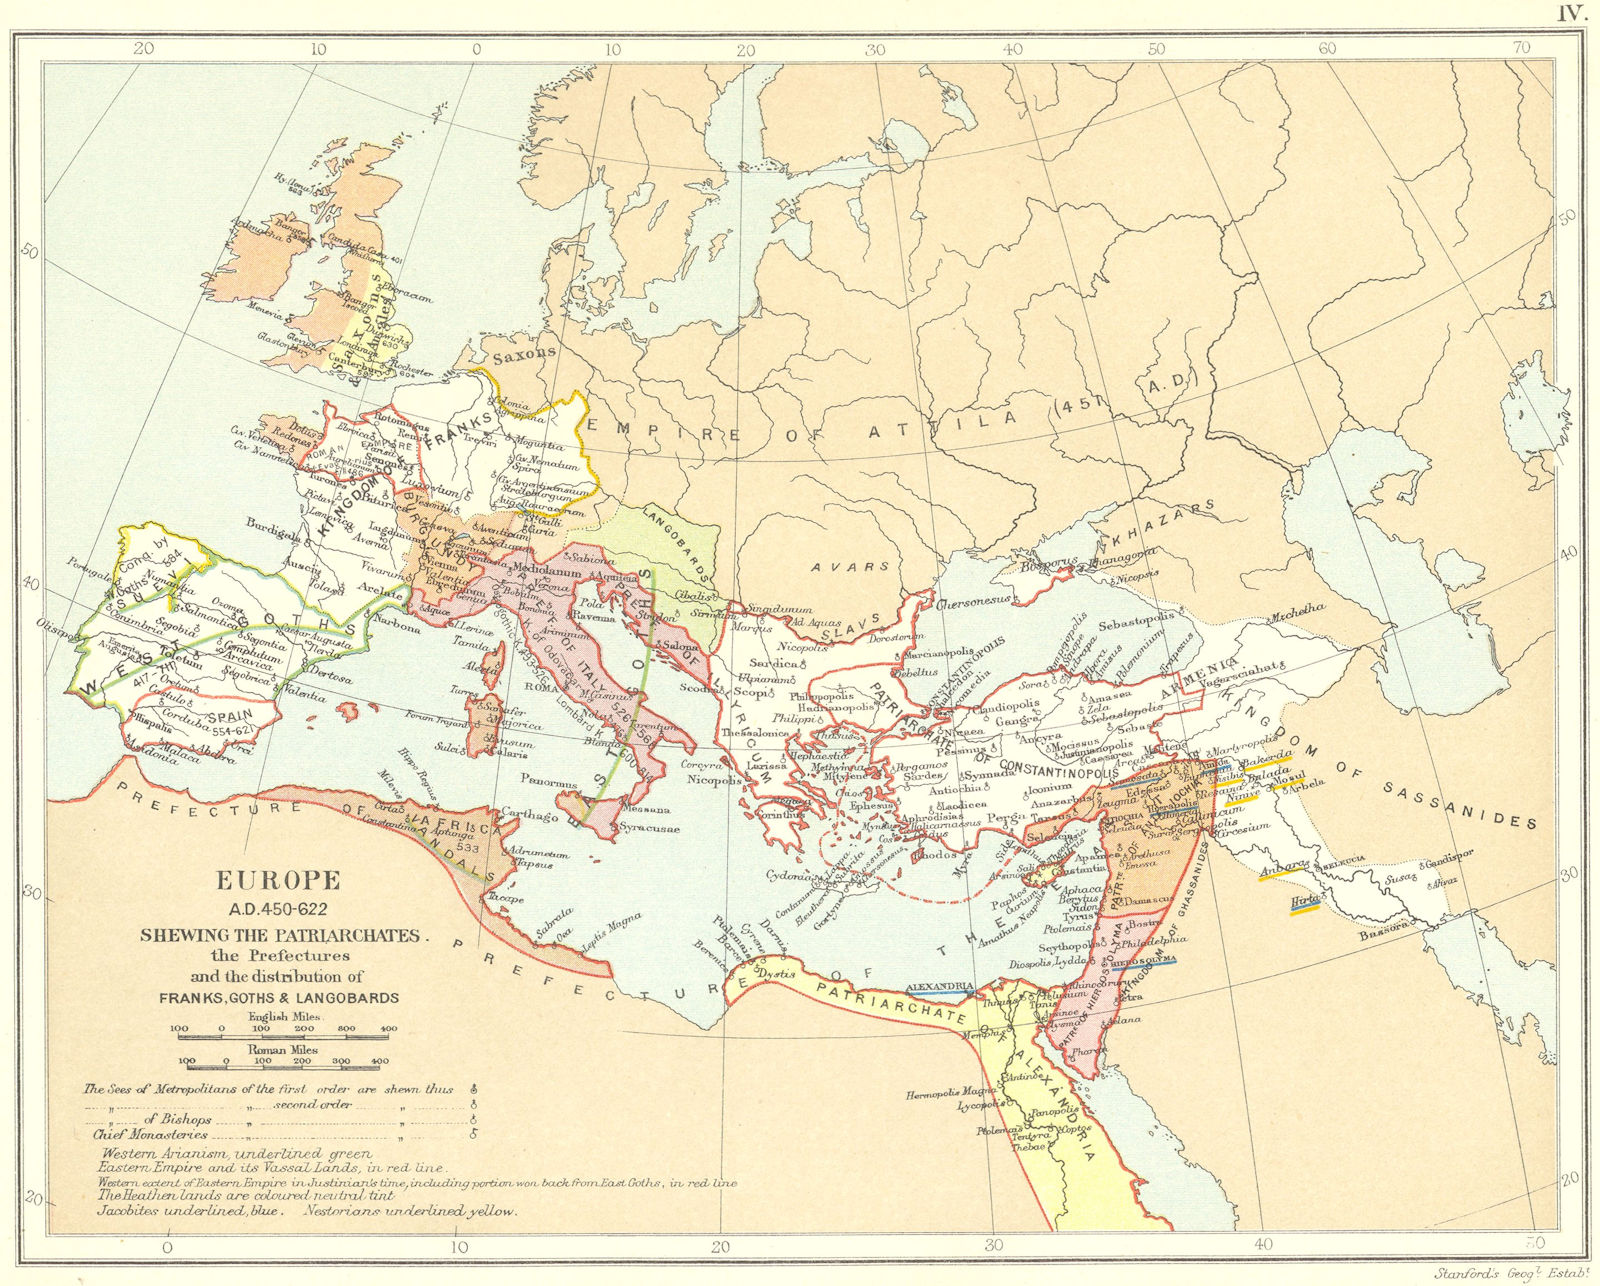 RELIGIOUS EUROPE 450-622AD.Patriarchates Sees.Franks Goths Langobards 1897 map